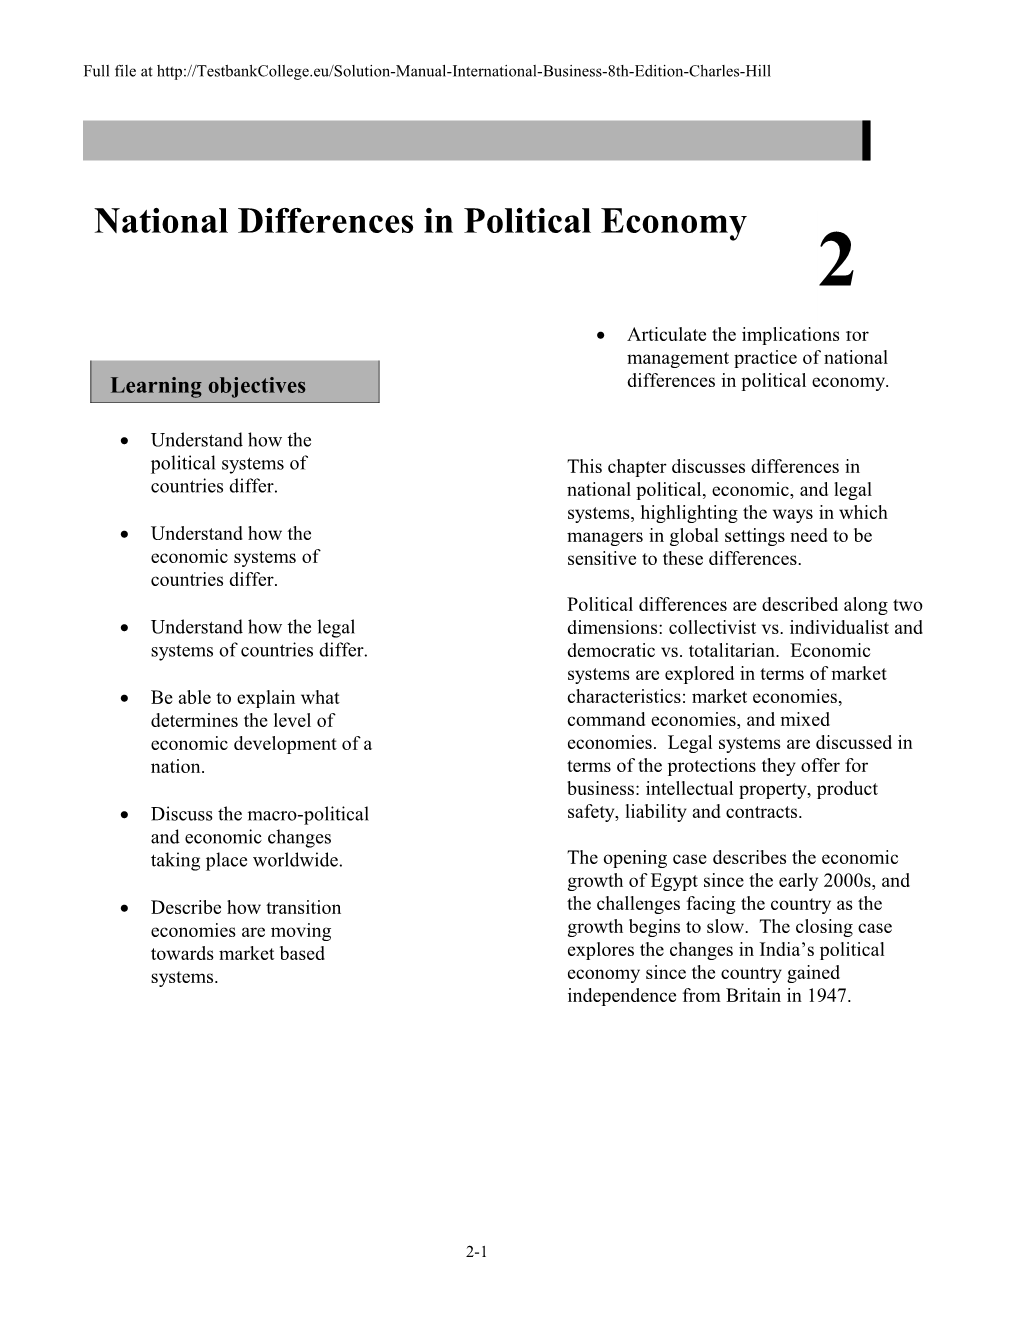 National Differences in Political Economy s1